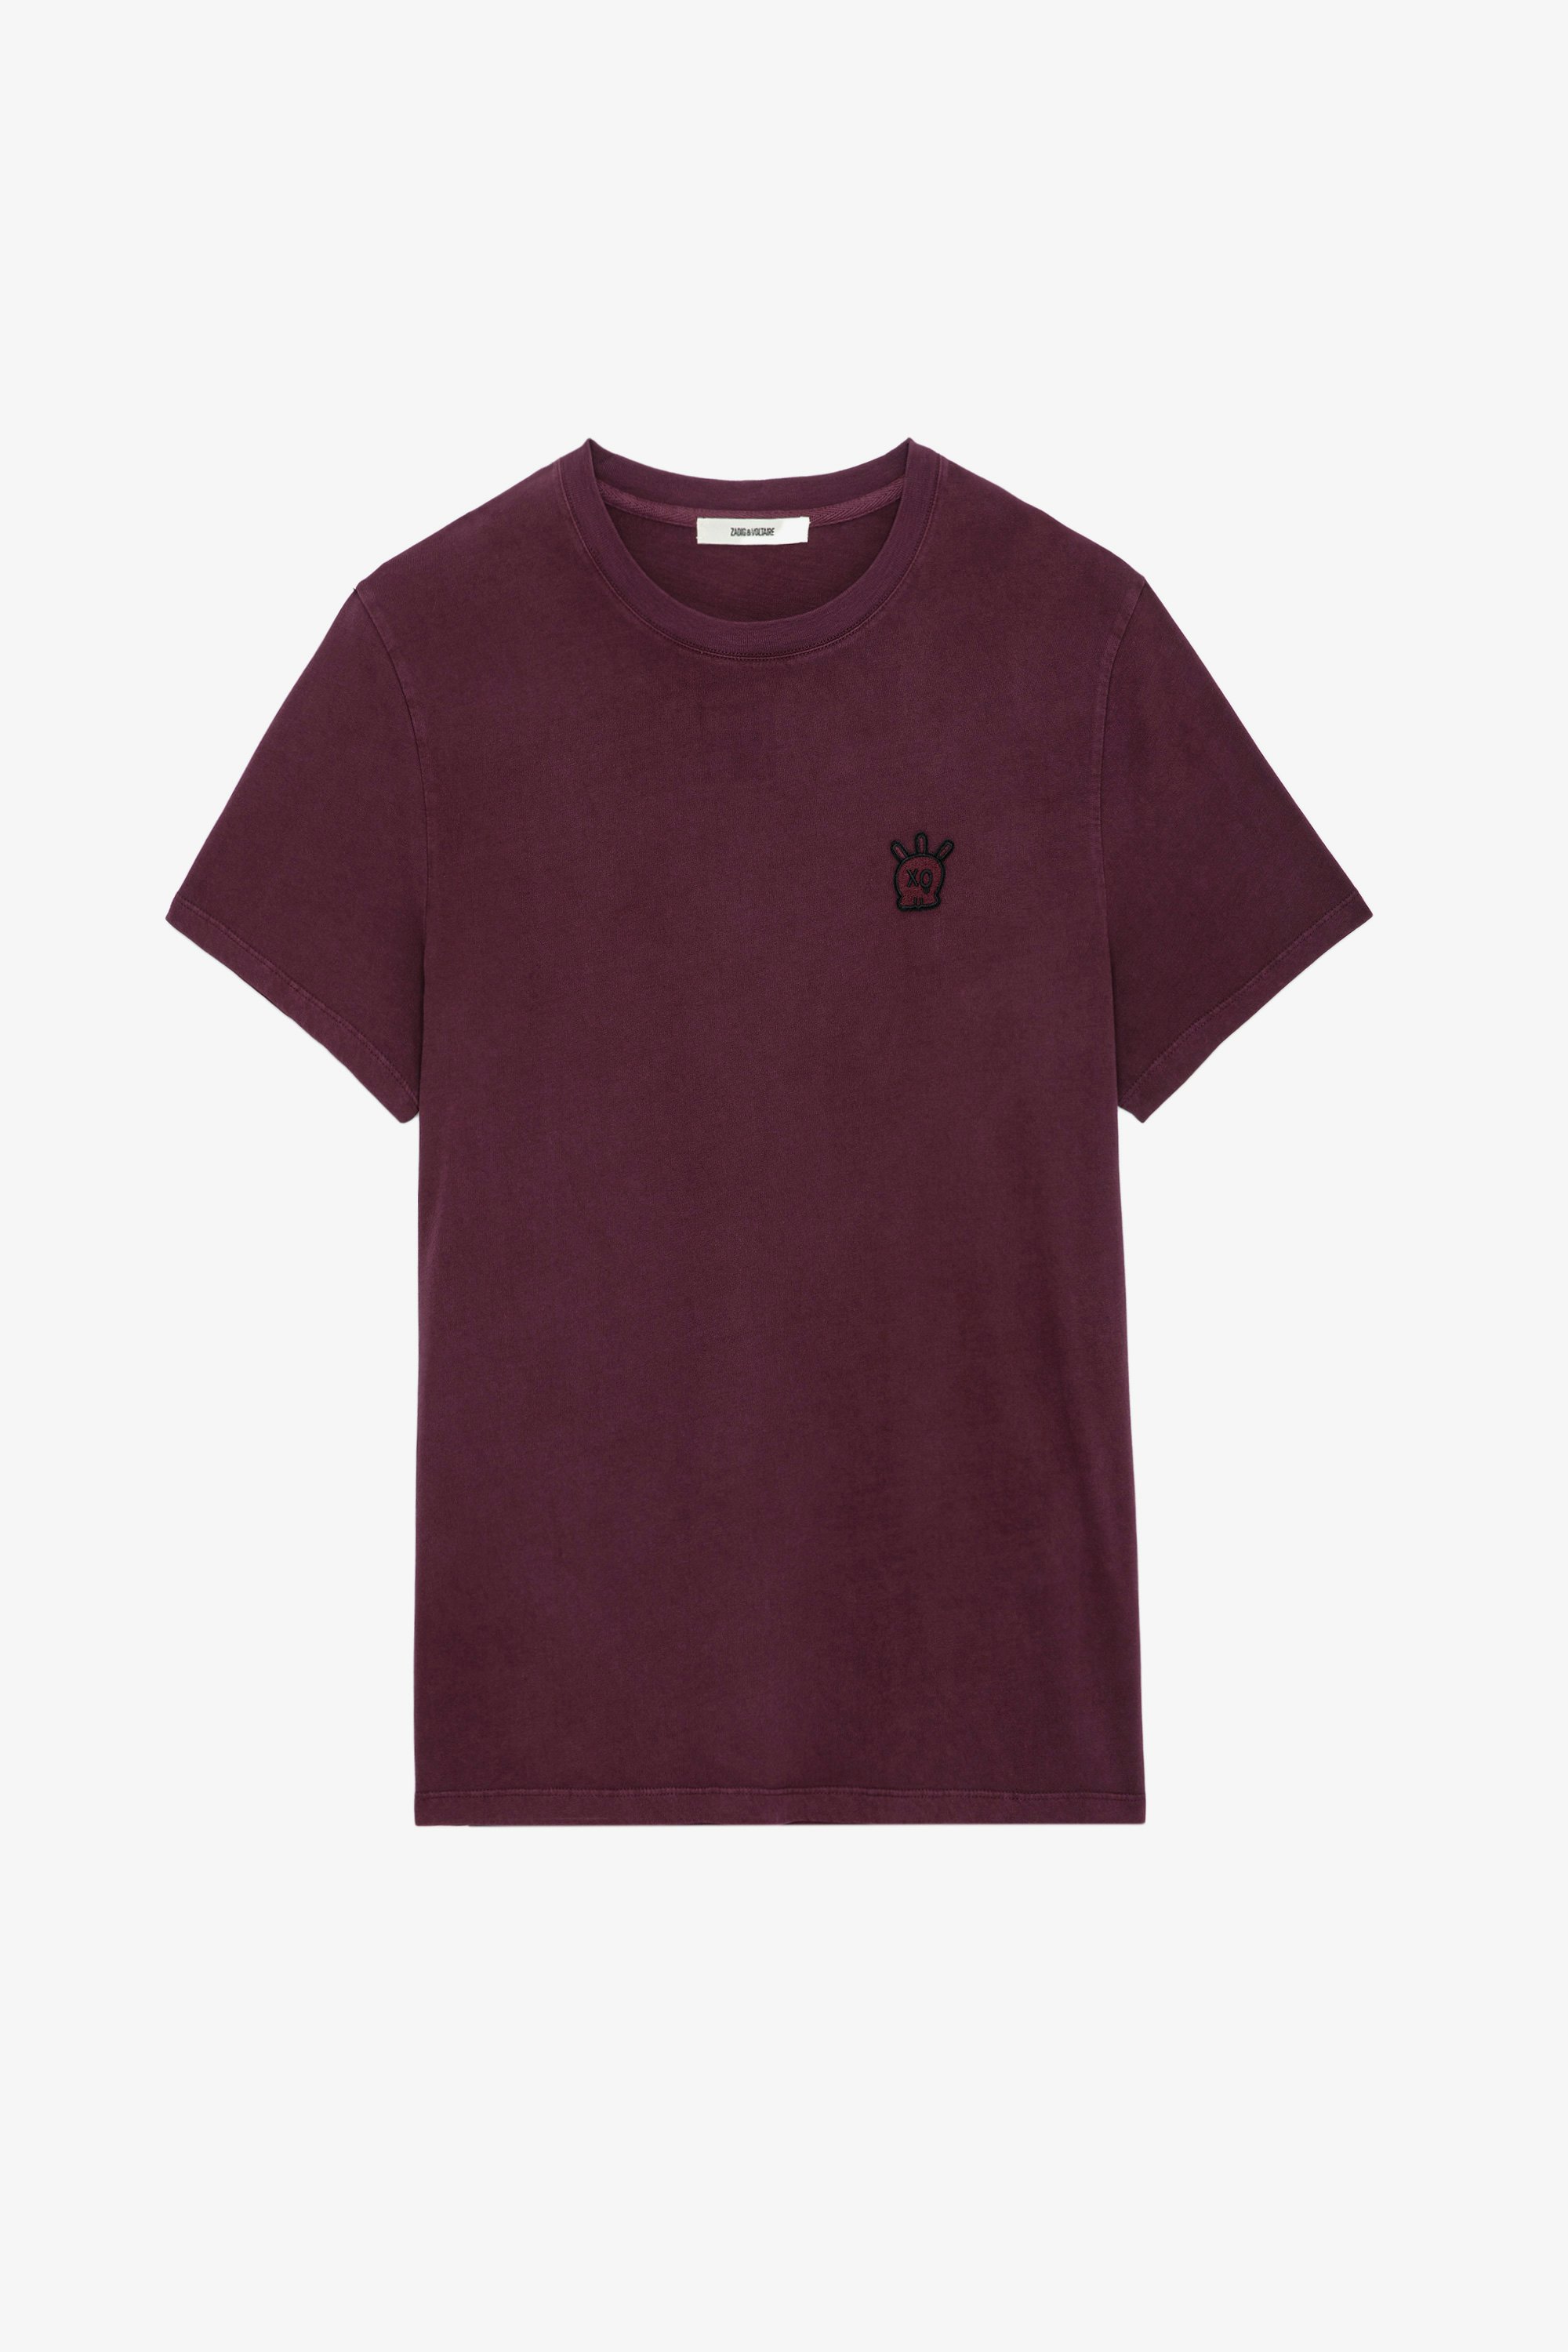 Tommy Skull Ｔシャツ - Burgundy cotton round-neck T-shirt with short sleeves and Skull XO patch.